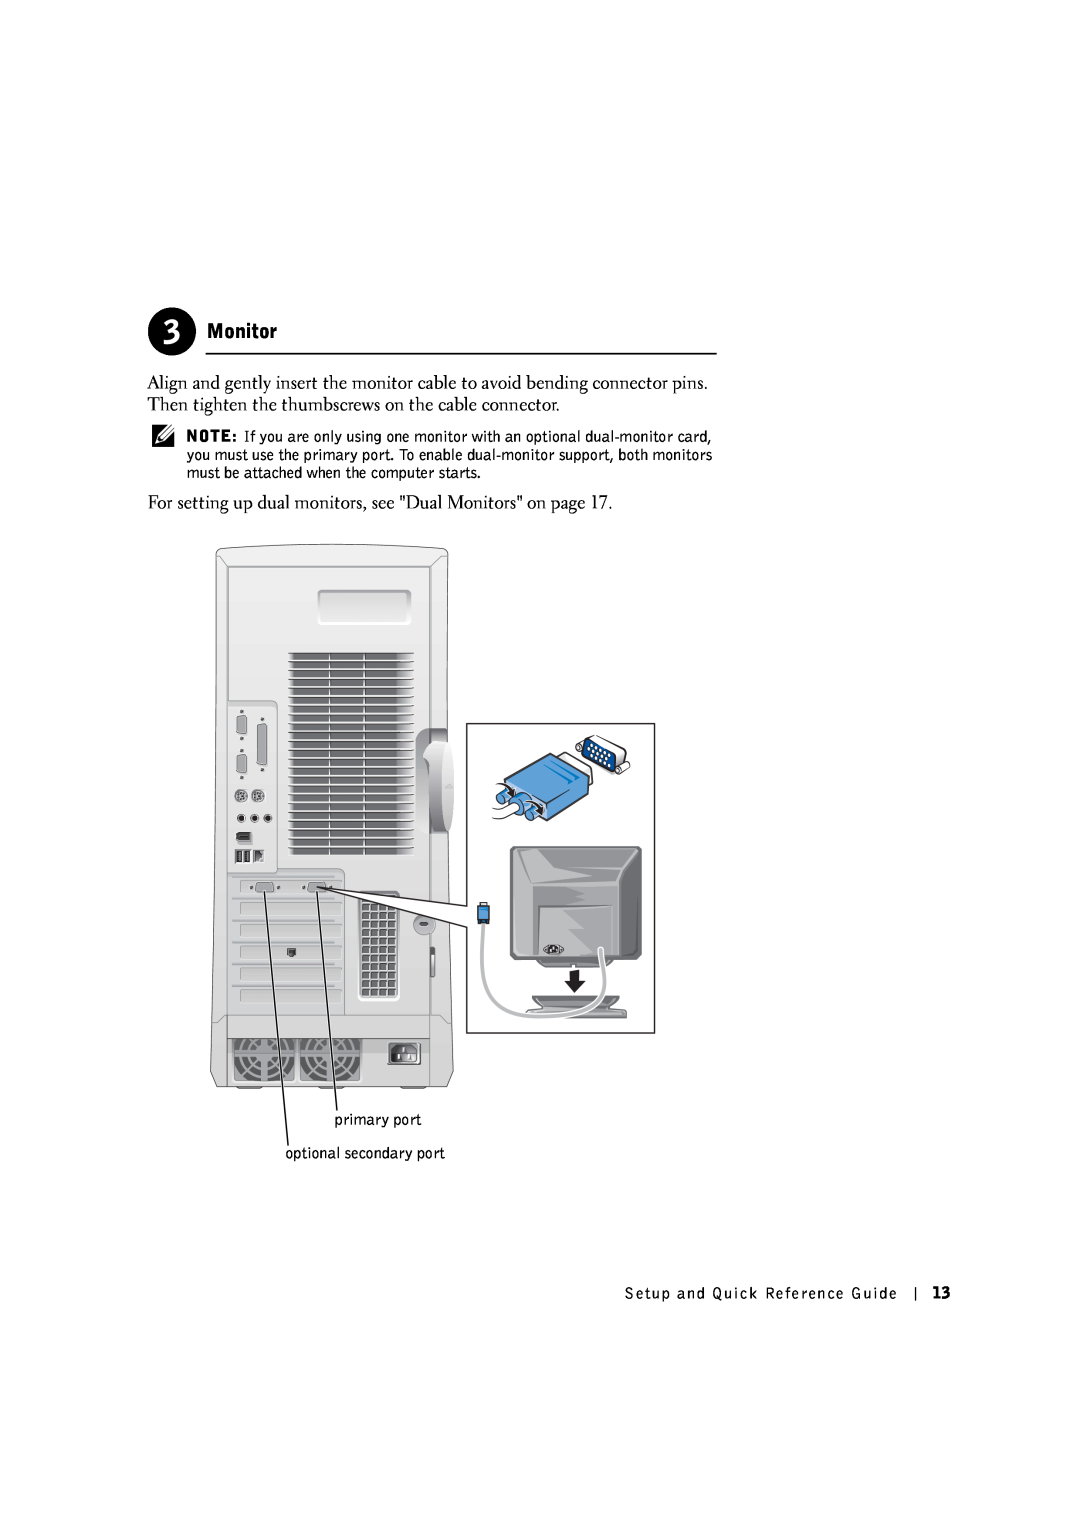 Dell 533CX manual For setting up dual monitors, see Dual Monitors on page 